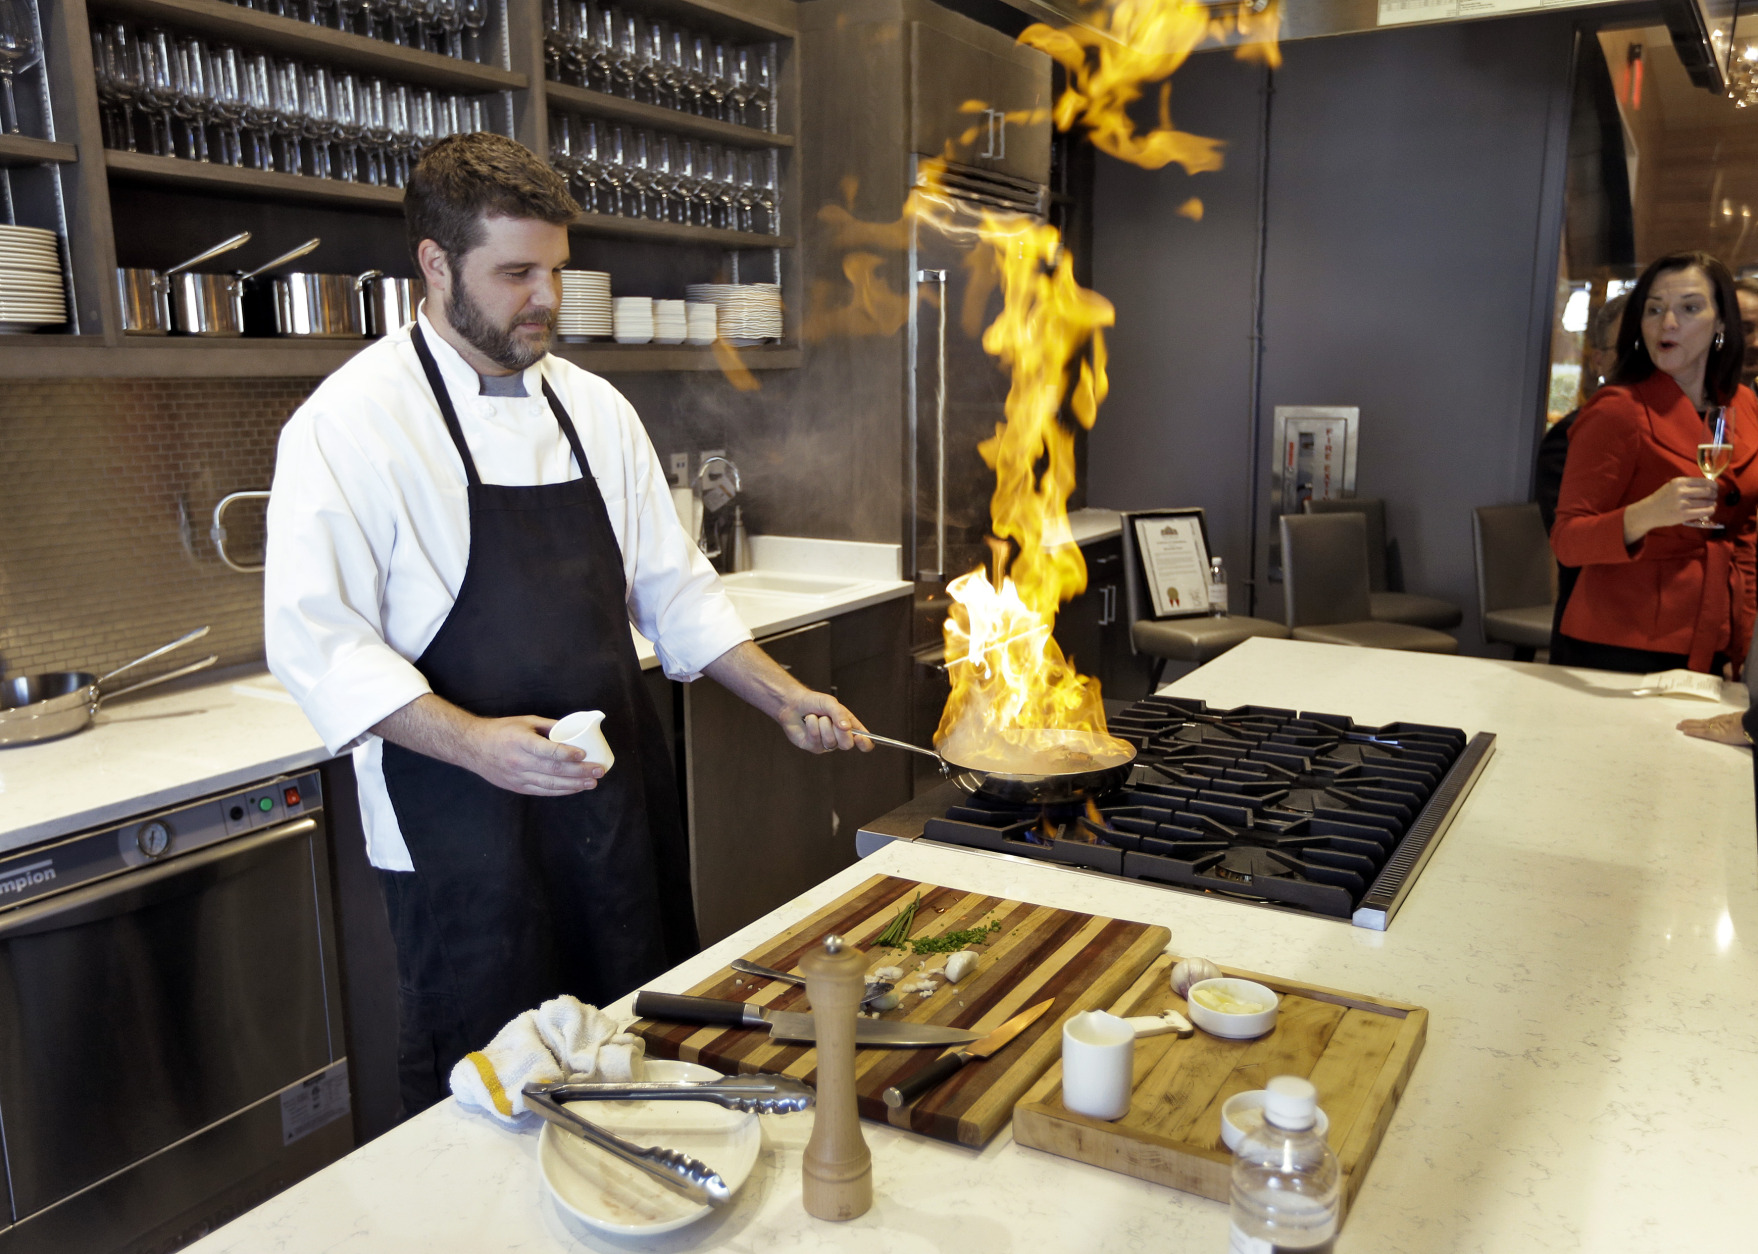 This Dec. 17, 2013 photo shows Executive Chef Chad Johnson cooking a steak during a tour of the new Epicurean Hotel in Tampa, Fla. Tampas newest hotel, which opened this week, is focused on food, with a restaurant, bakery, culinary theater, wine store and cooking classes onsite. (AP Photo/Chris O'Meara)